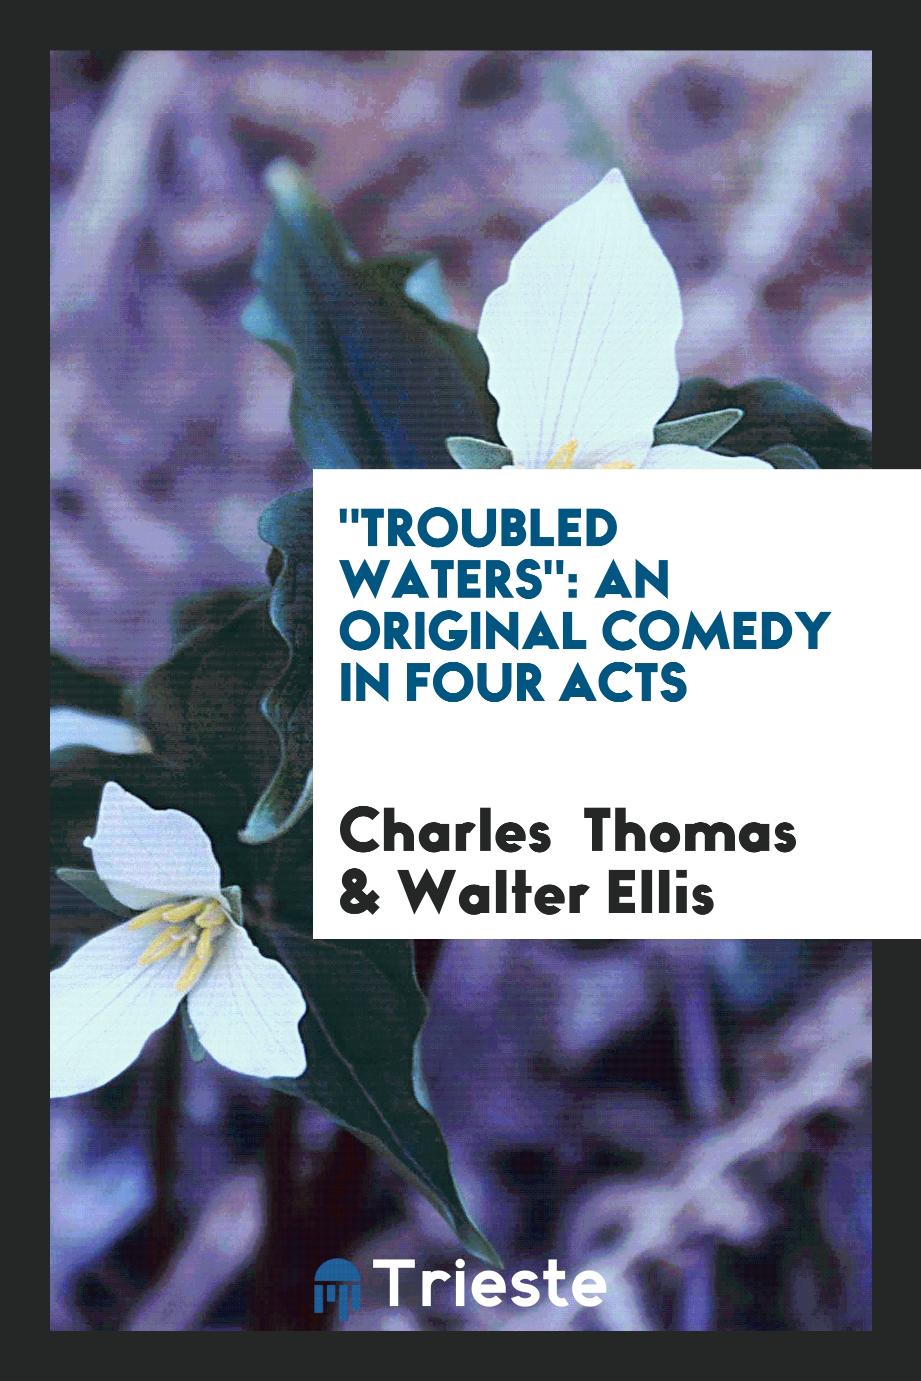 "Troubled Waters": An Original Comedy in Four Acts